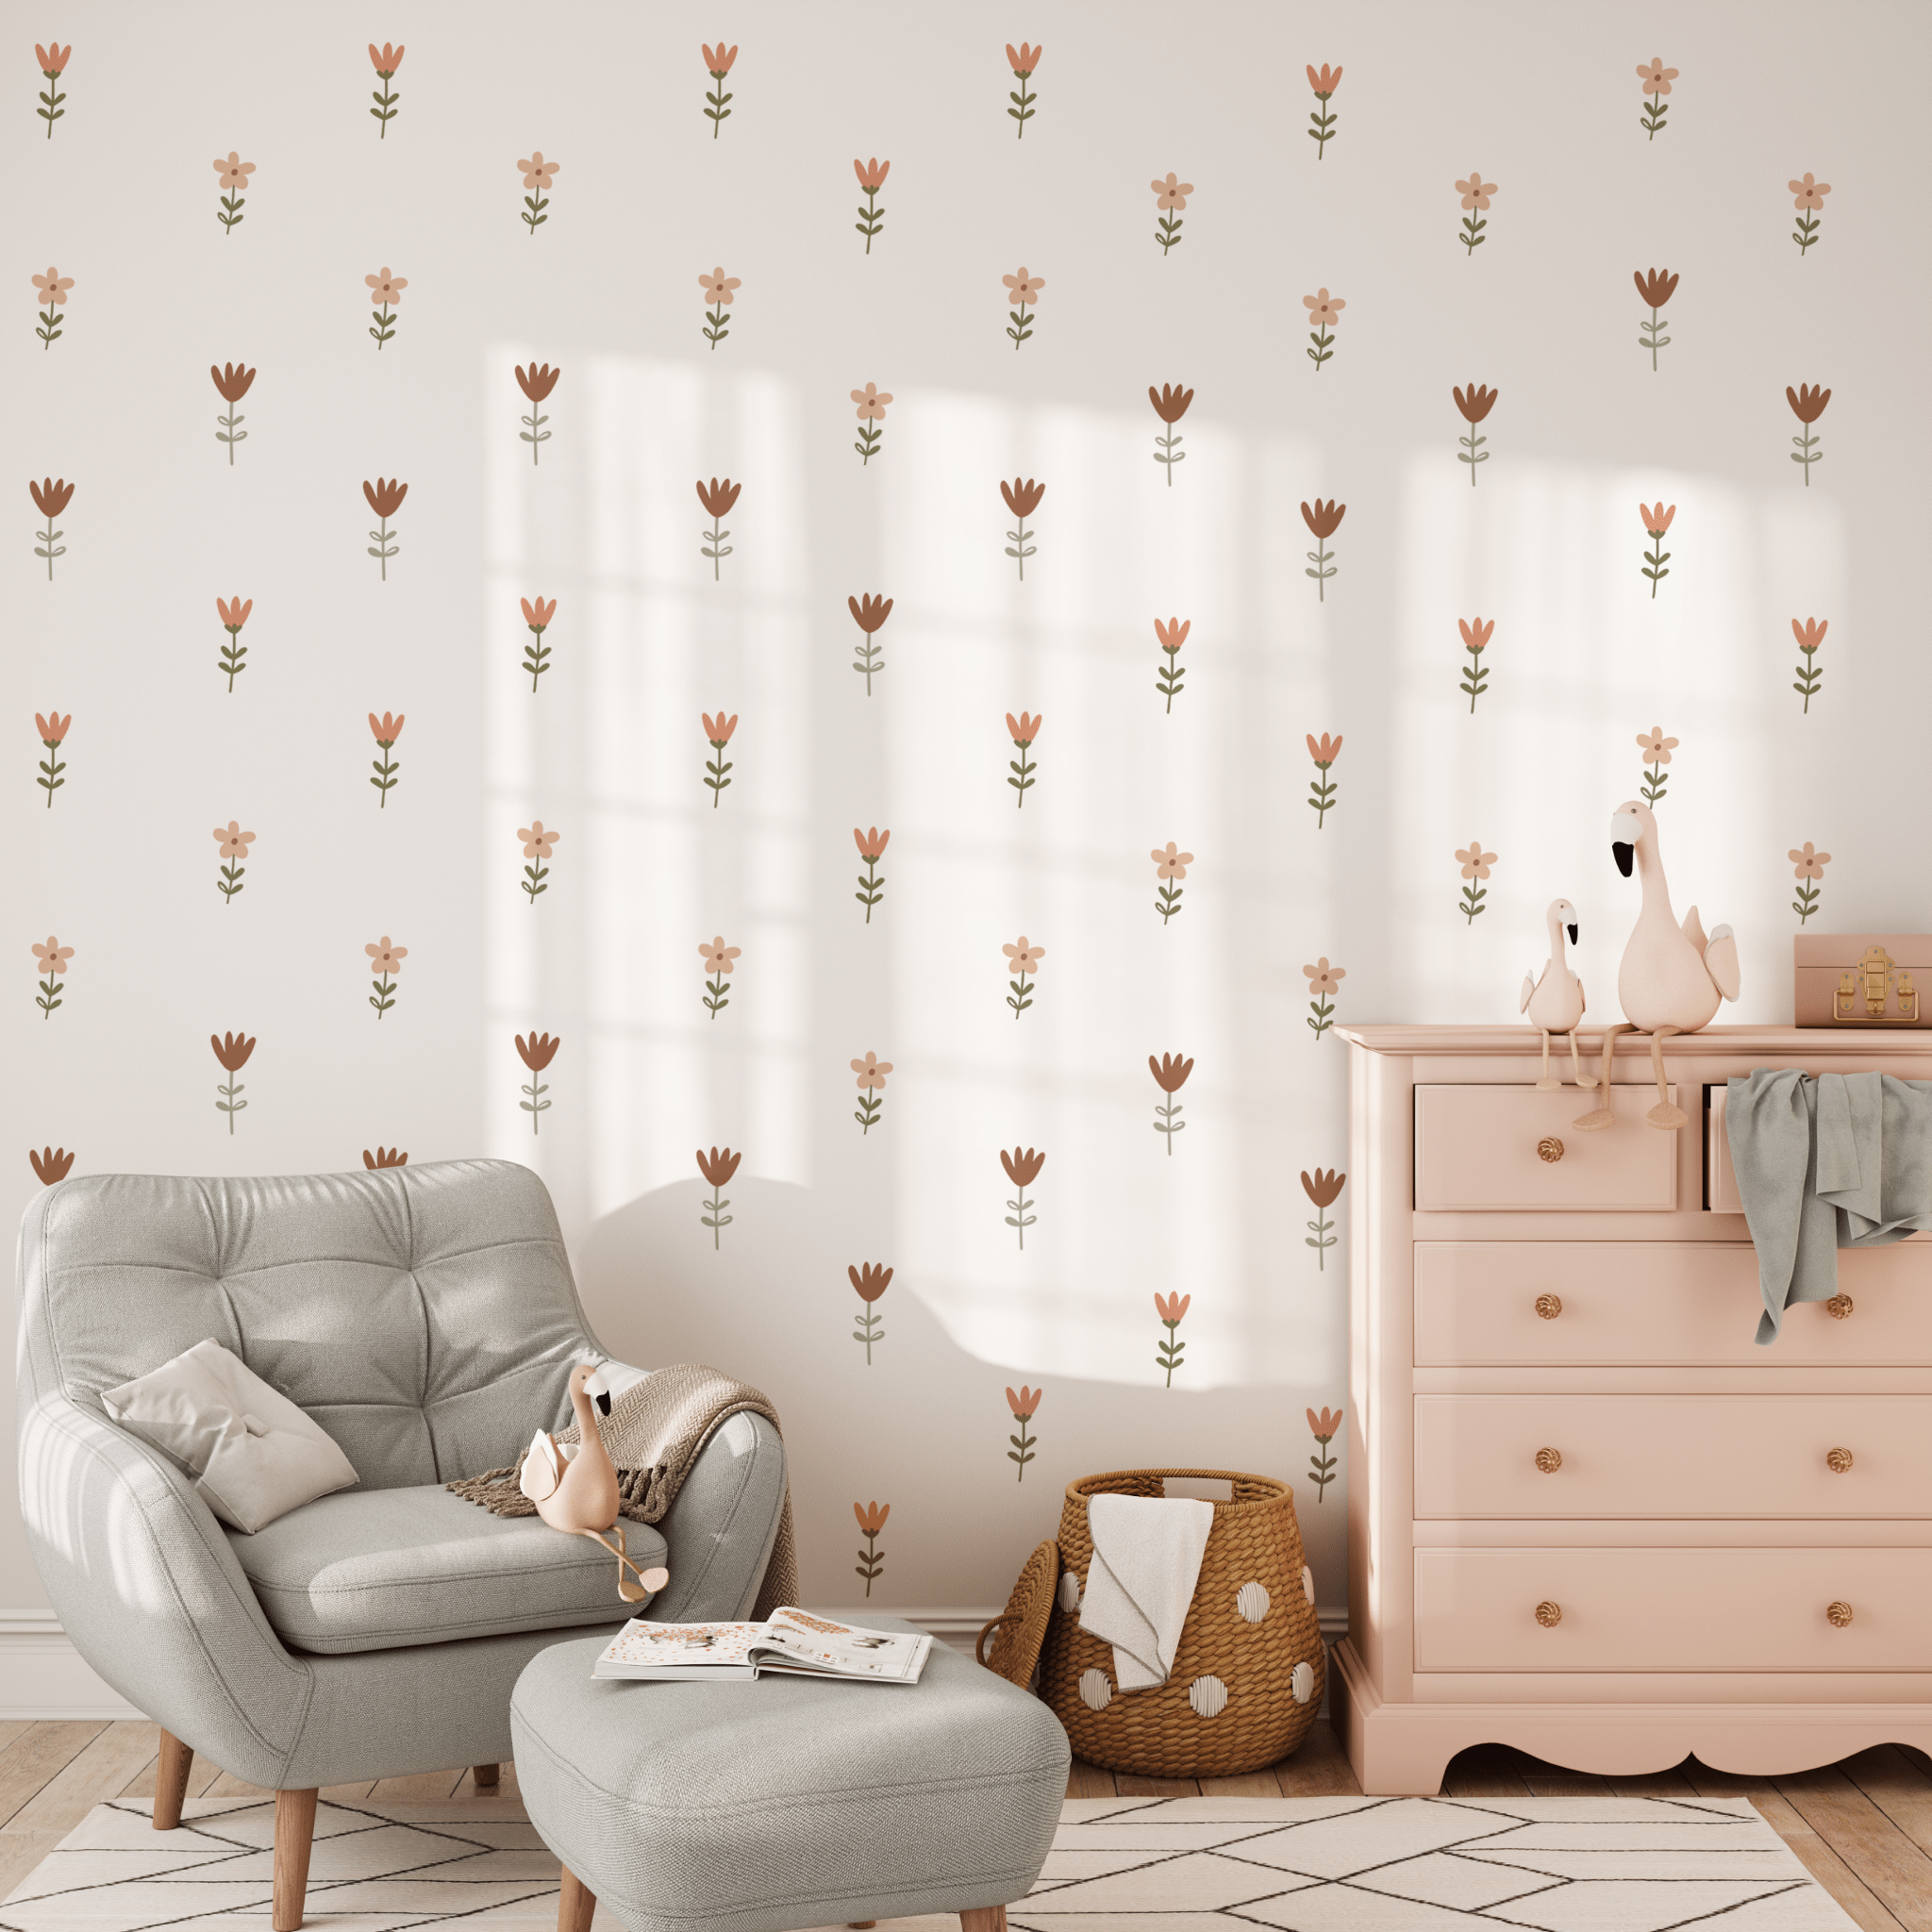 Nursery with soft pink and grey accents and small removable floral wall stickers